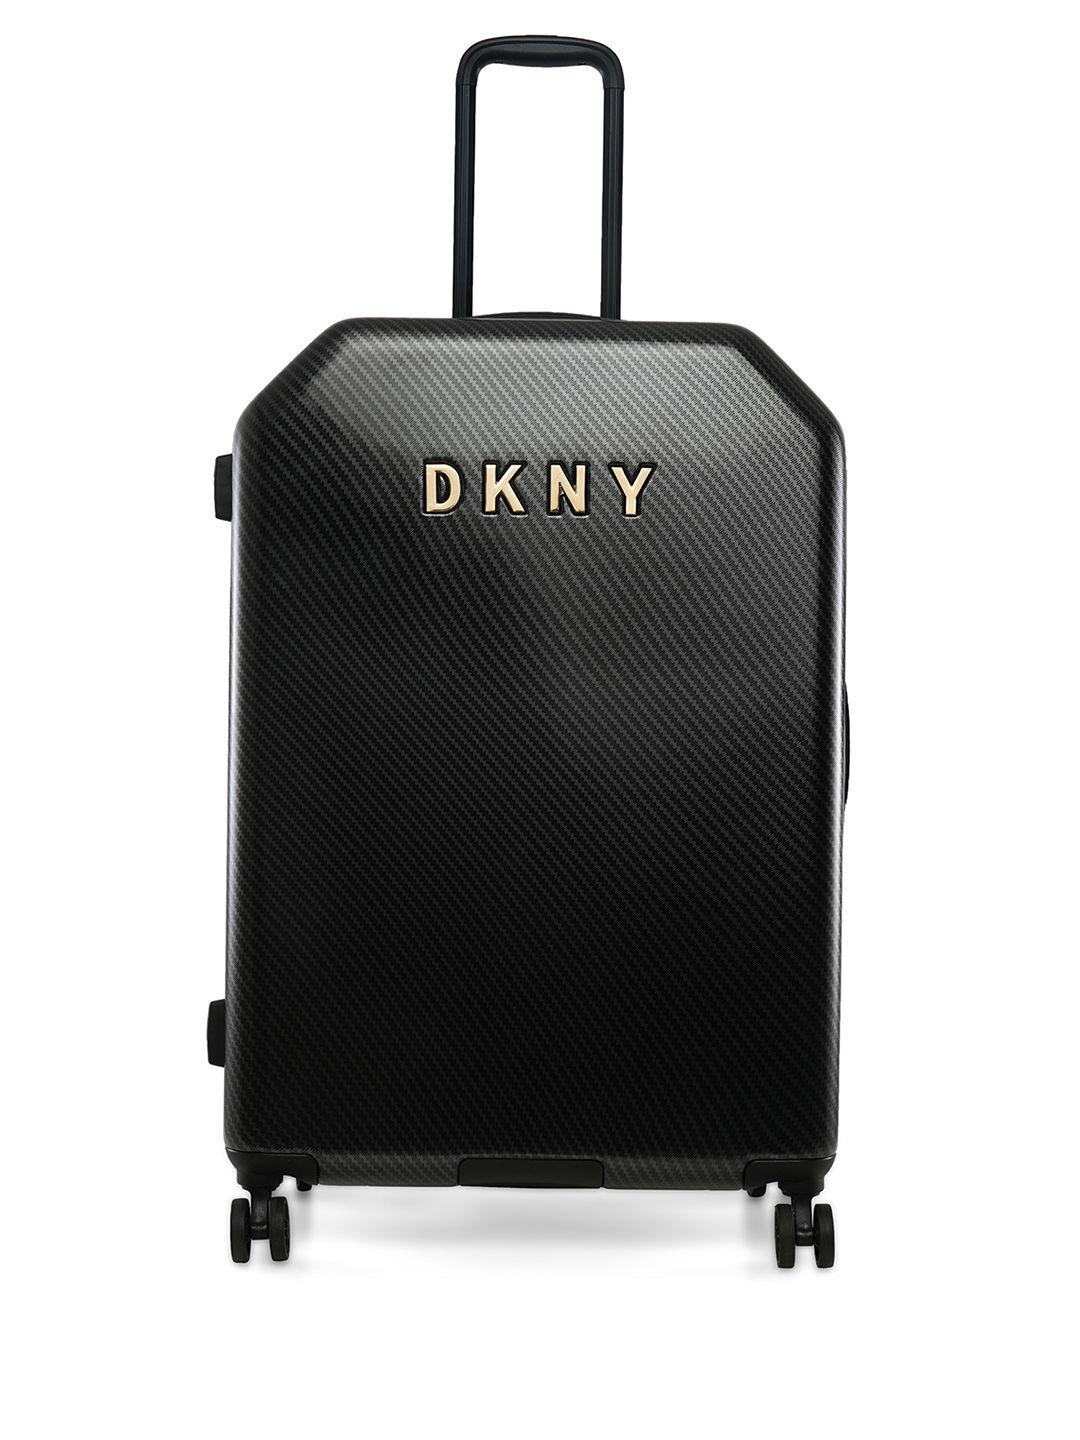 dkny allure 2.0 abs material hard 28" large size trolley